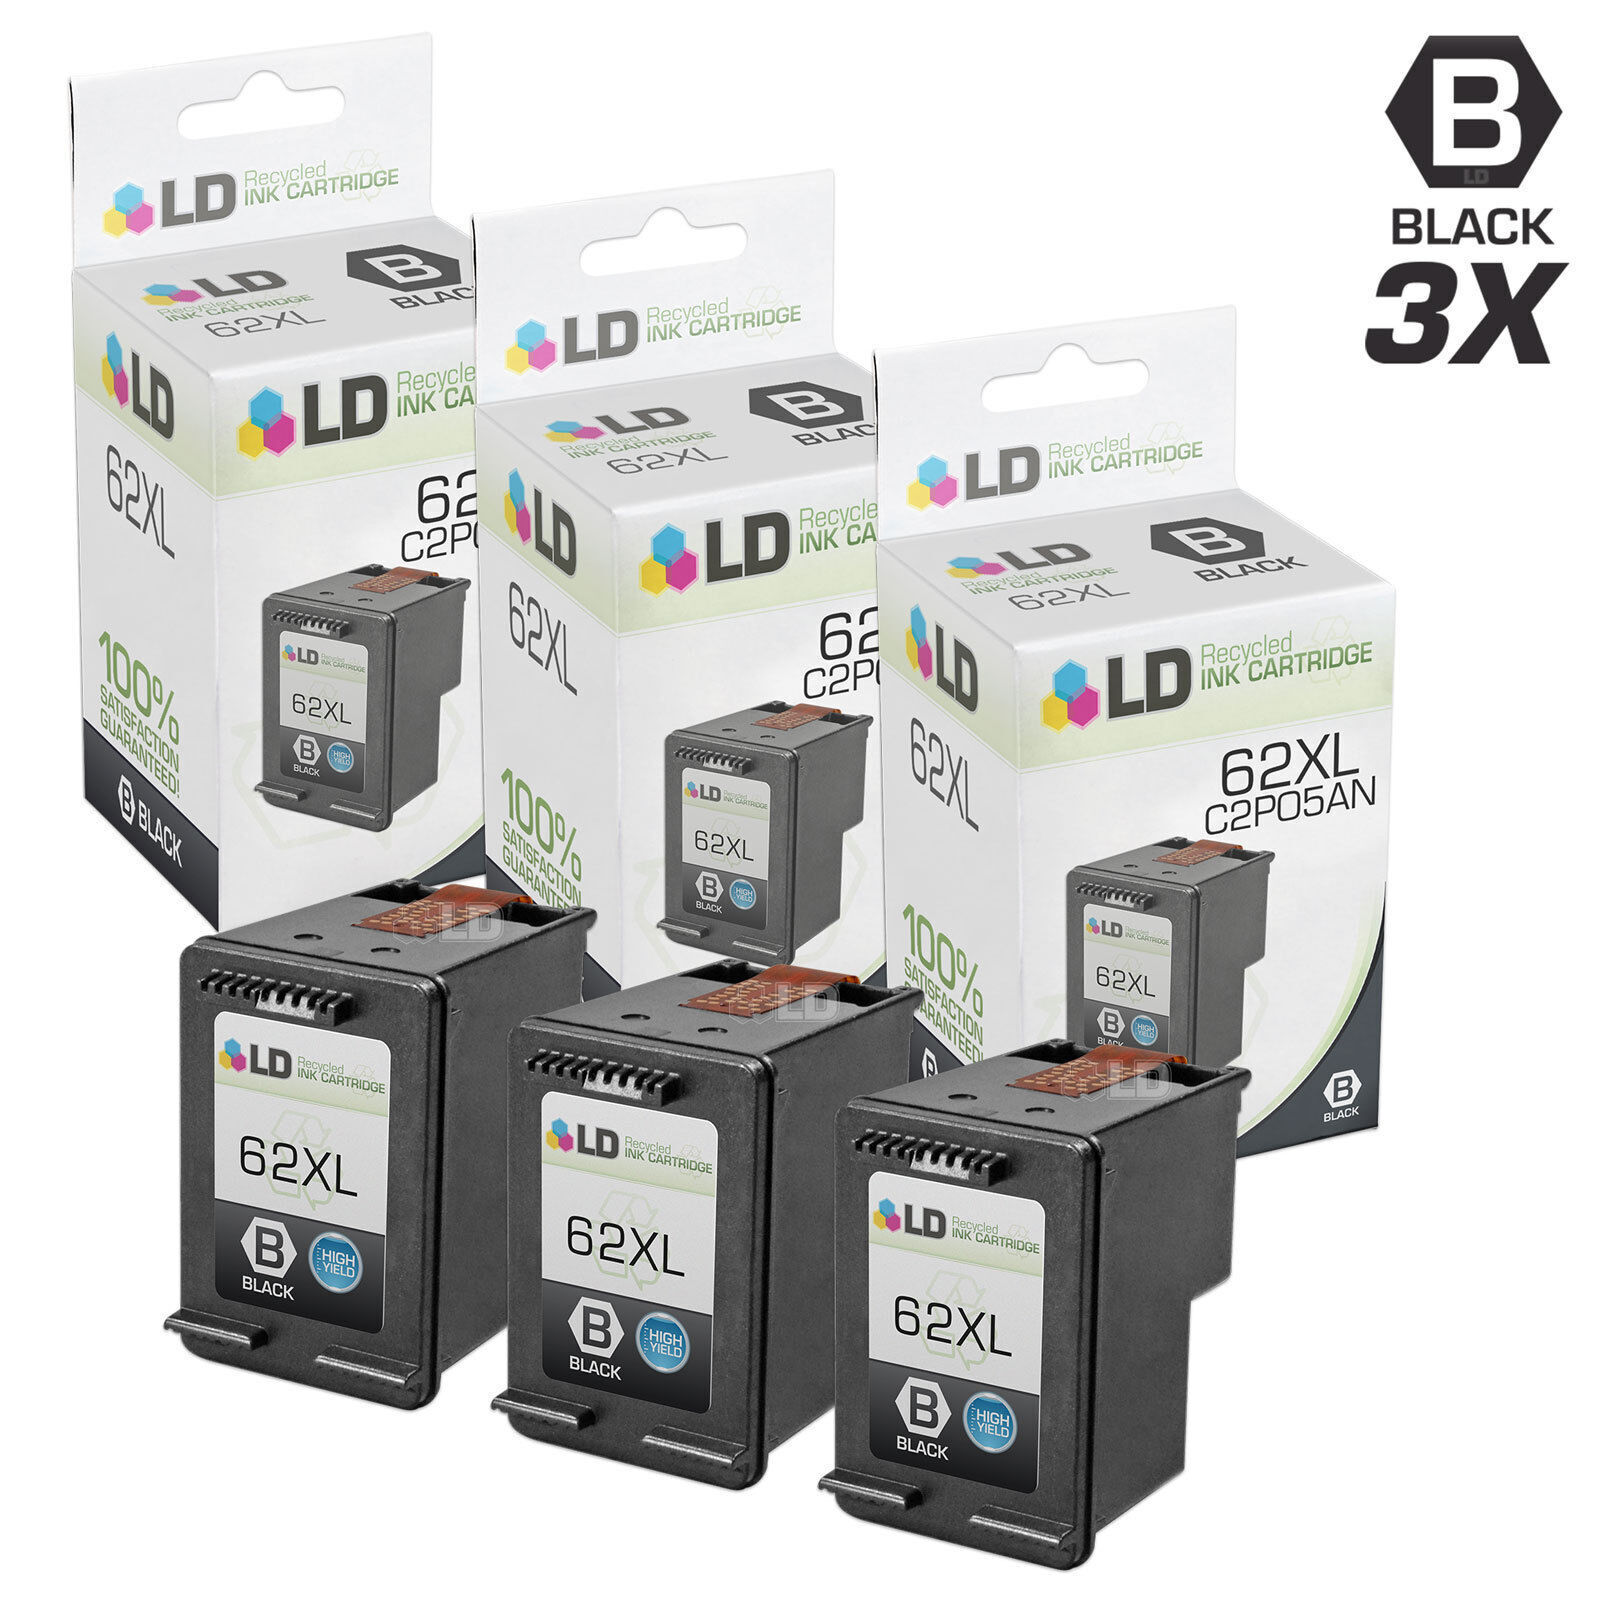 LD Remanufactured Replacements for HP C2P05AN/62XL 3PK Black Ink Cartridges